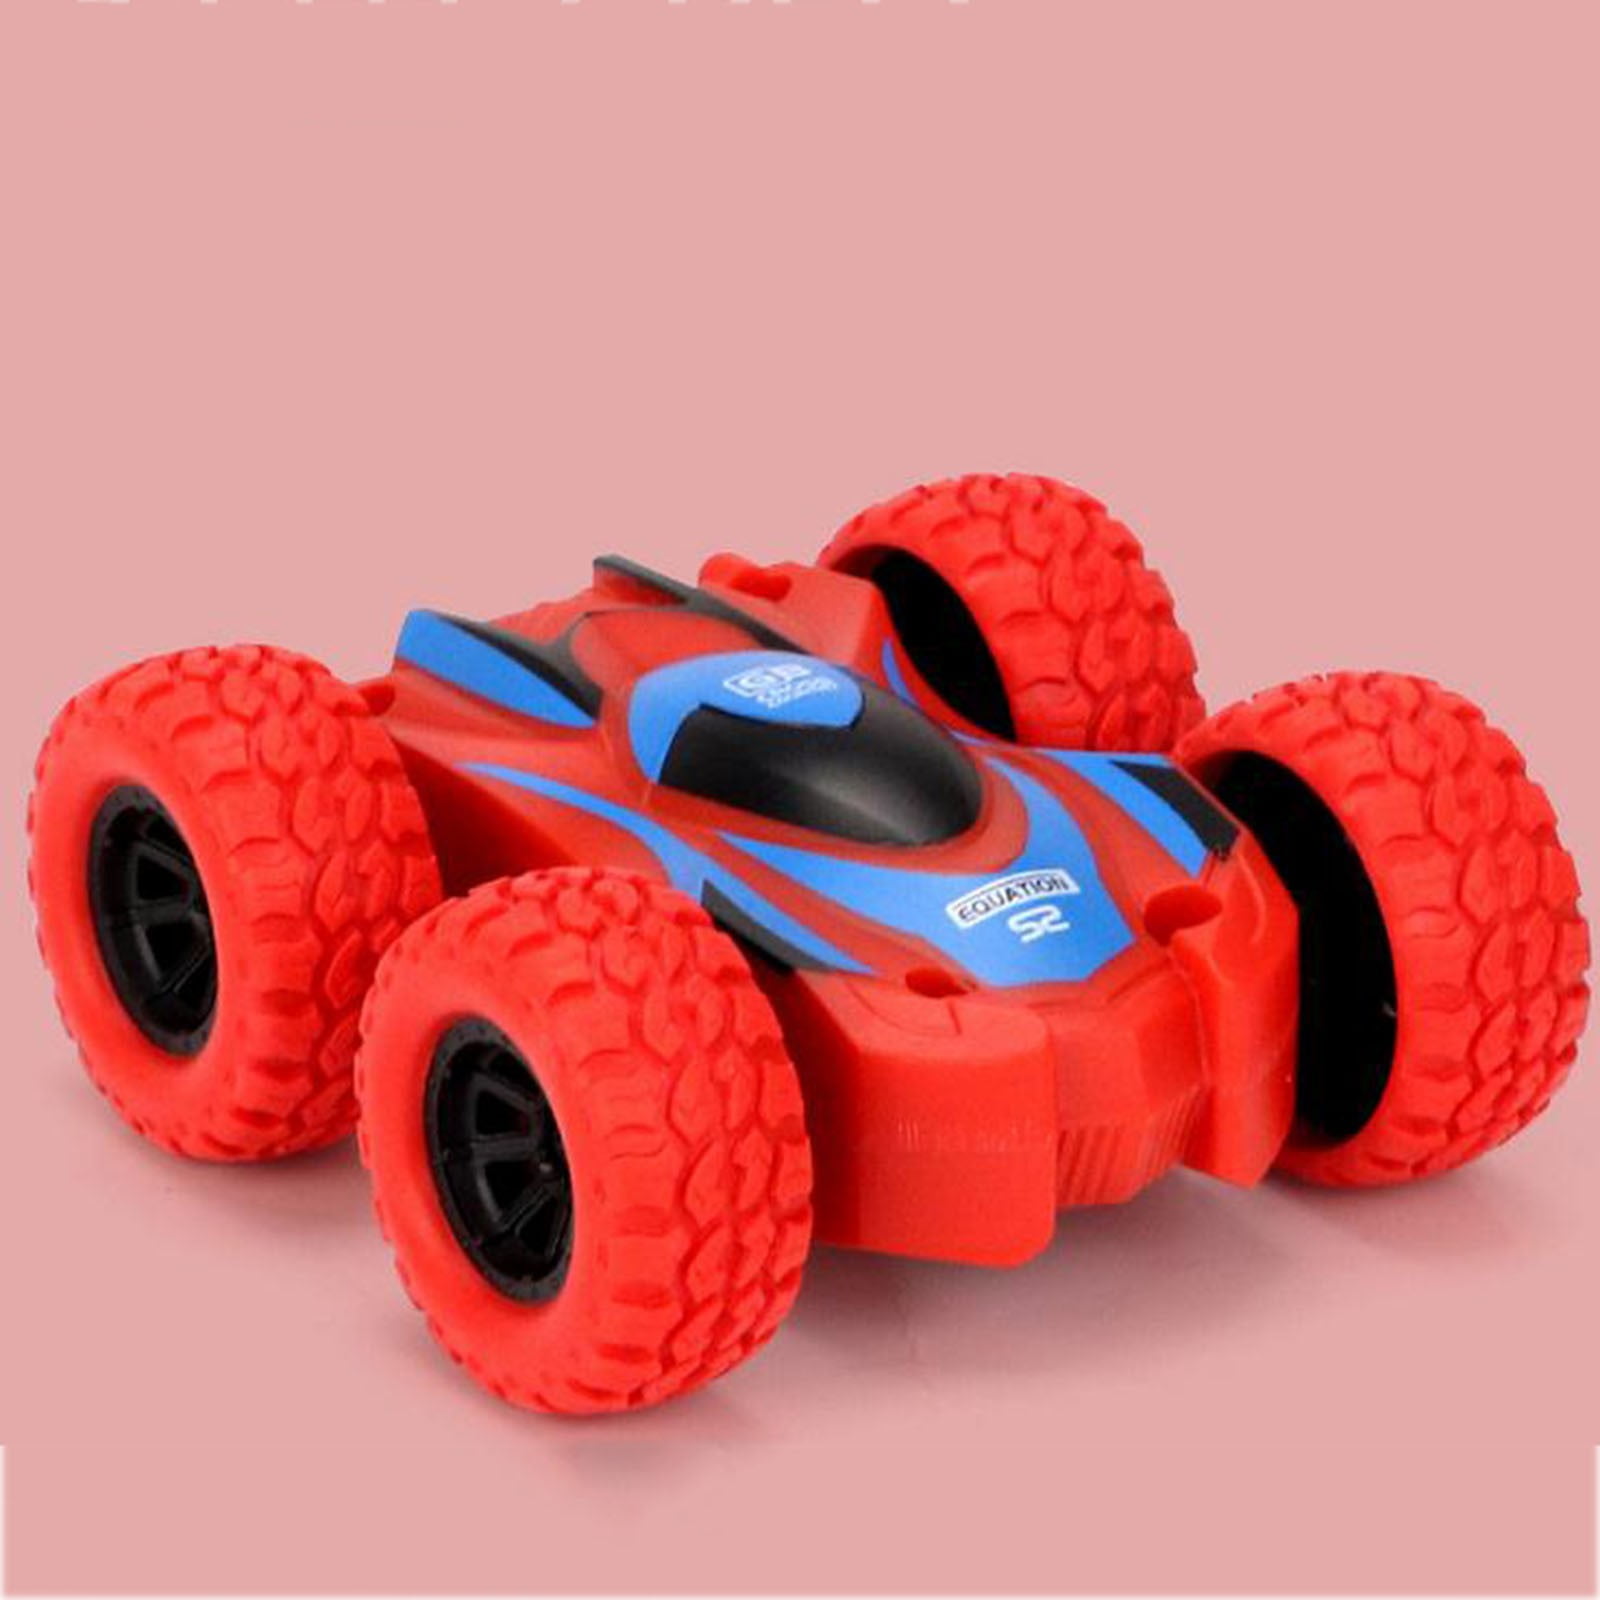 Birthday Party Supplies for Toddlers Kids Ages 3+ 8 Shells Monster Truck Toys for Boys and Girls 2 Cars Friction Powered Push and Go Toy Cars Inertia Car Pull Back Vehicle Playsets